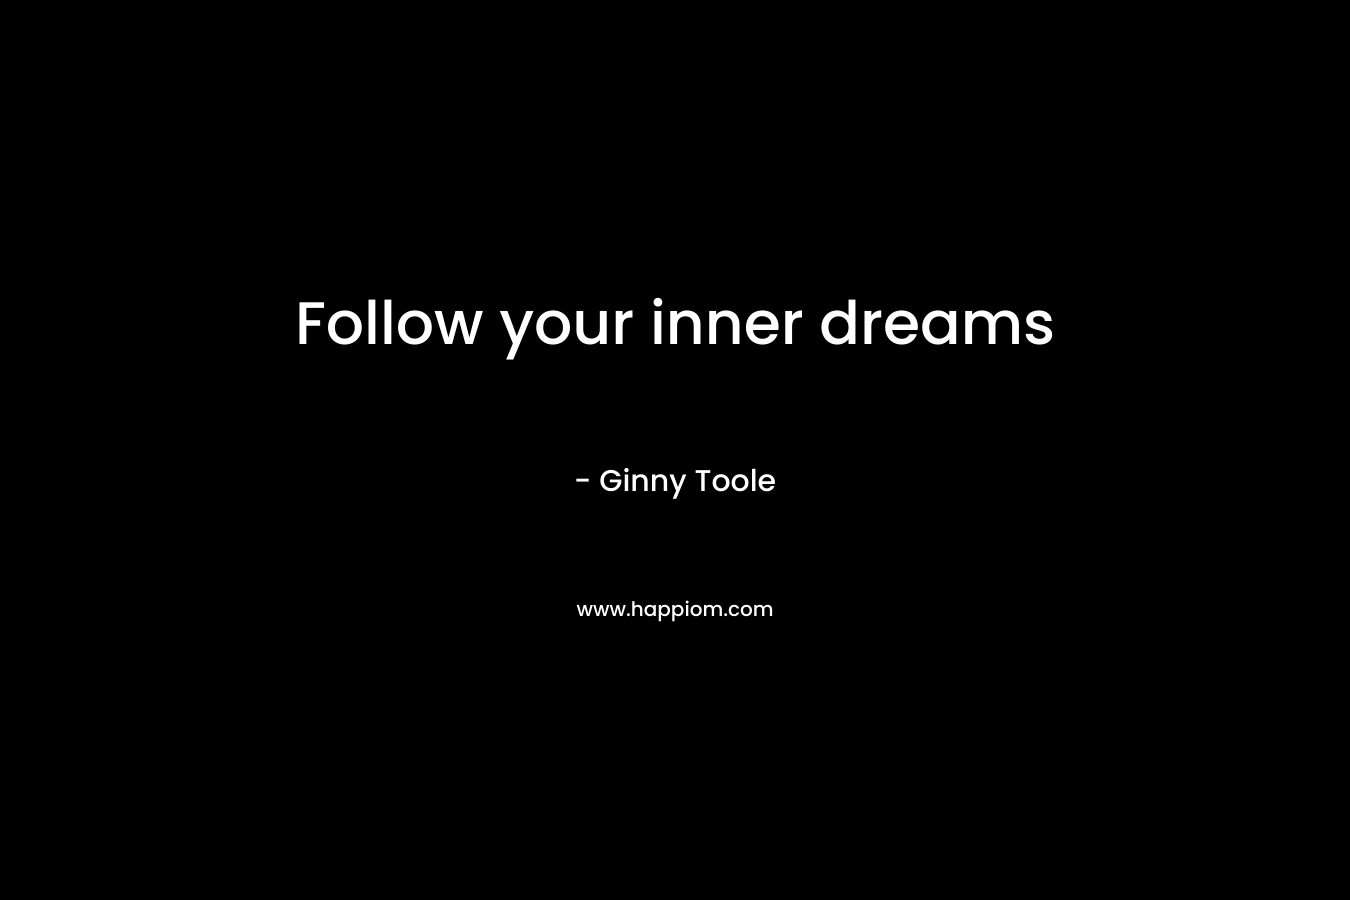 Follow your inner dreams – Ginny Toole